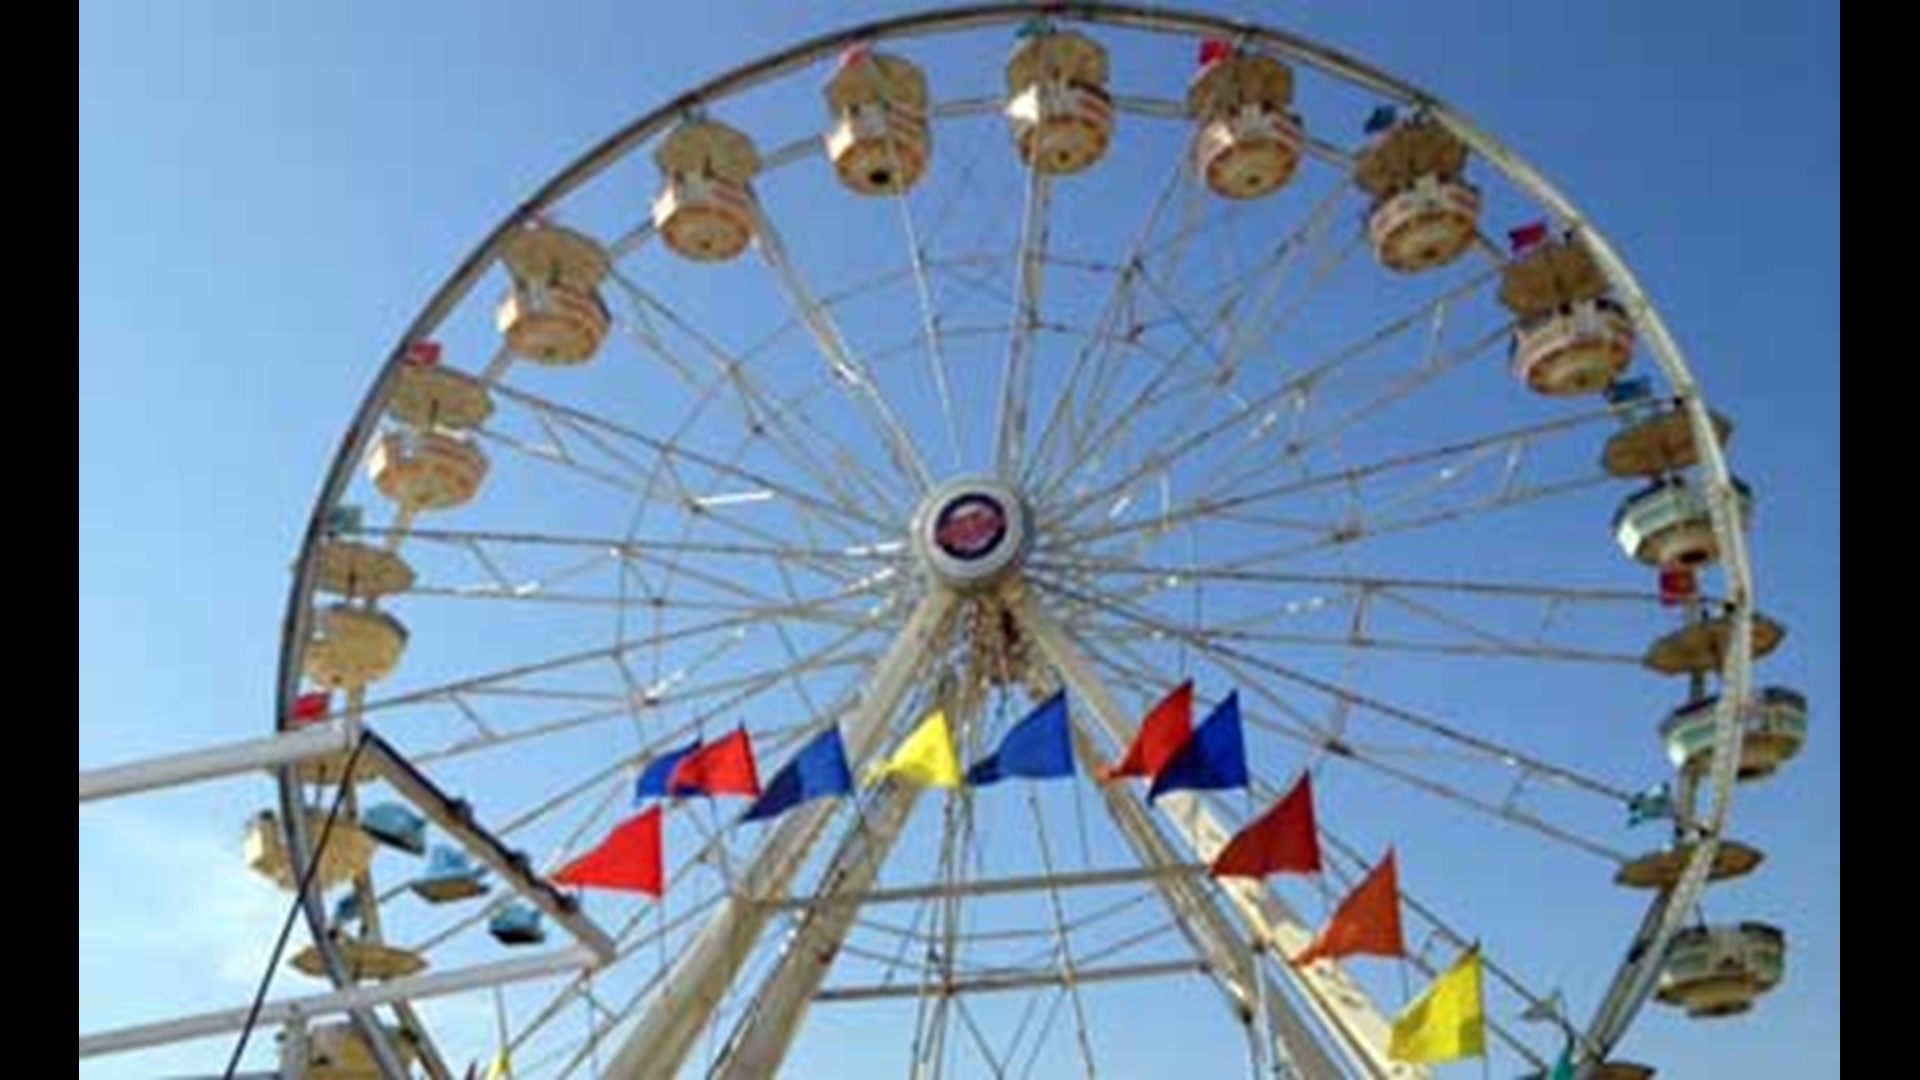 Marion County Fair opens today